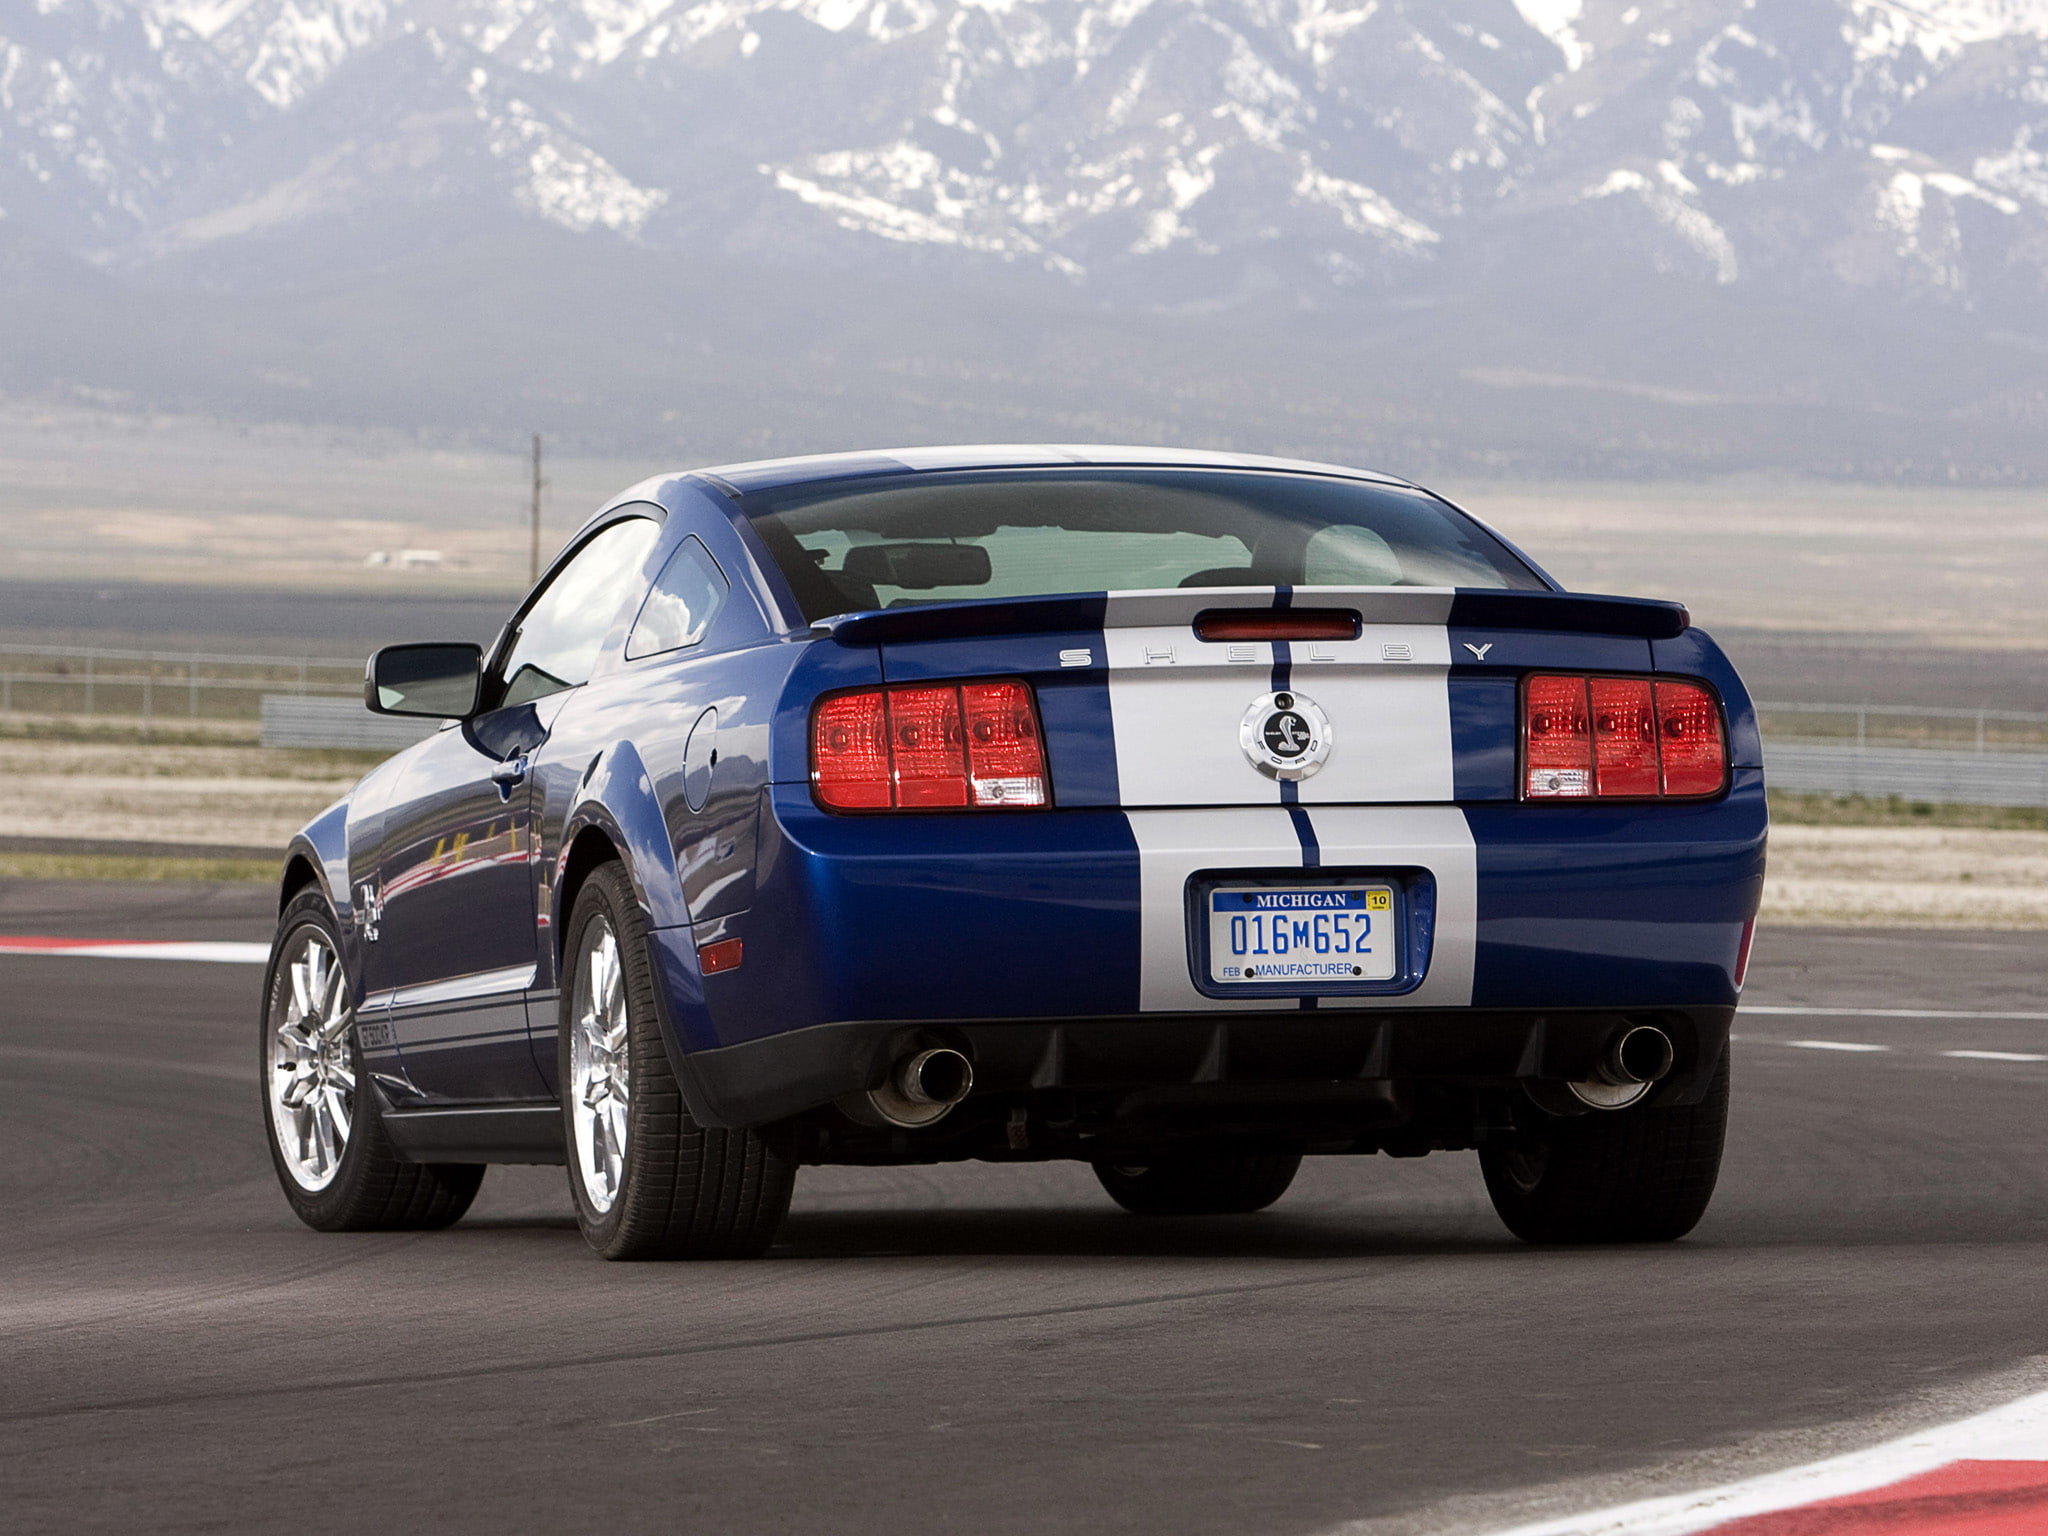 2008, classic, ford, gt500, gt500 kr, muscle, mustang, shelby